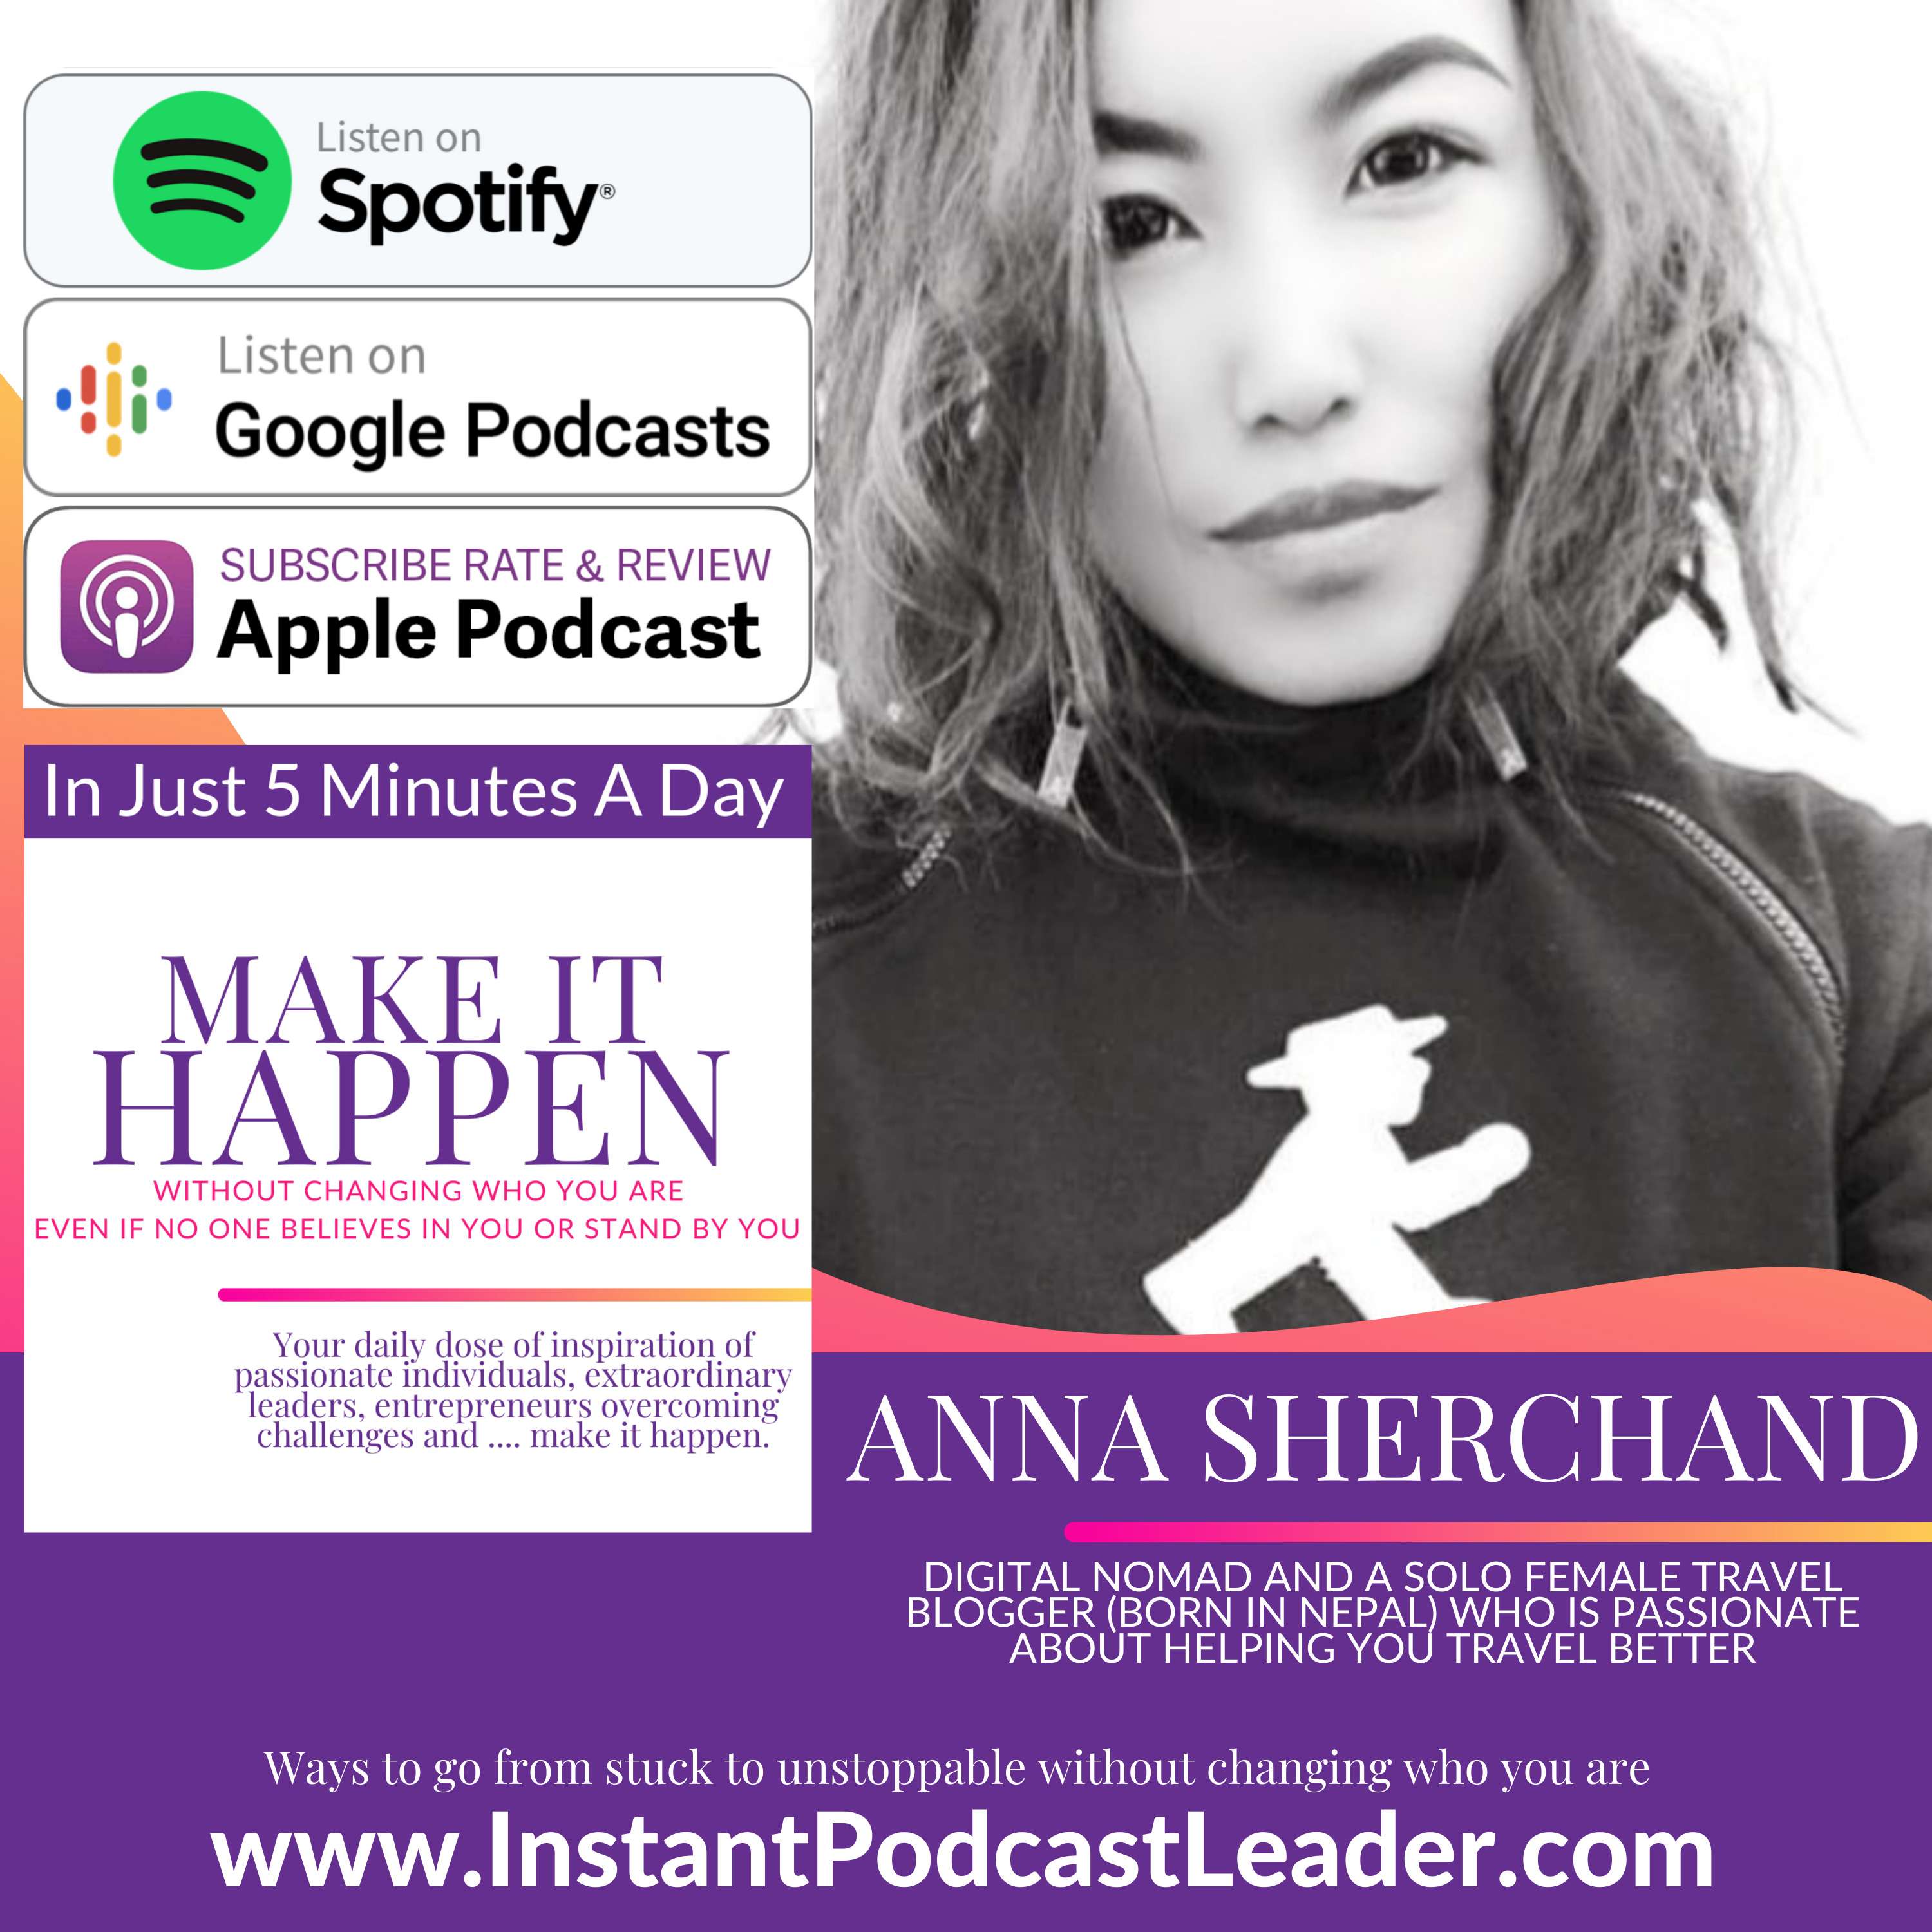 MIH EP47 Anna Sherchand Digital nomad and a solo female travel blogger (born in Nepal) who is passionate about helping you travel better